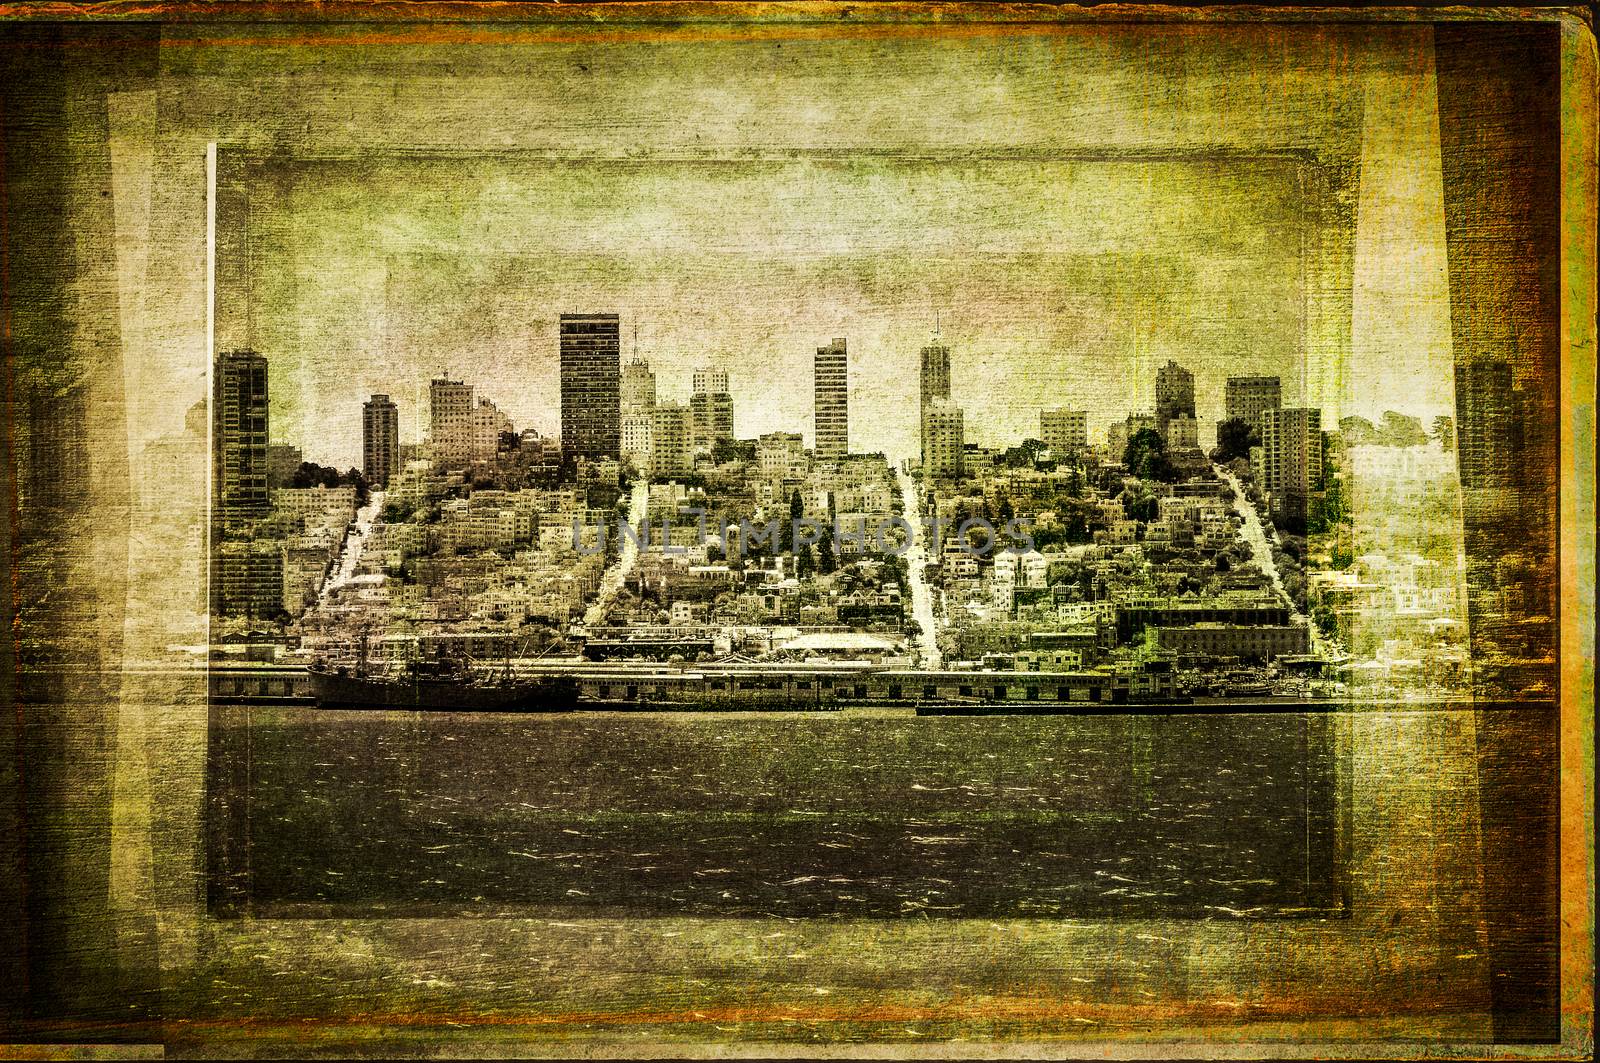 View of San Francisco skyline in vintage filtered textured style by martinm303